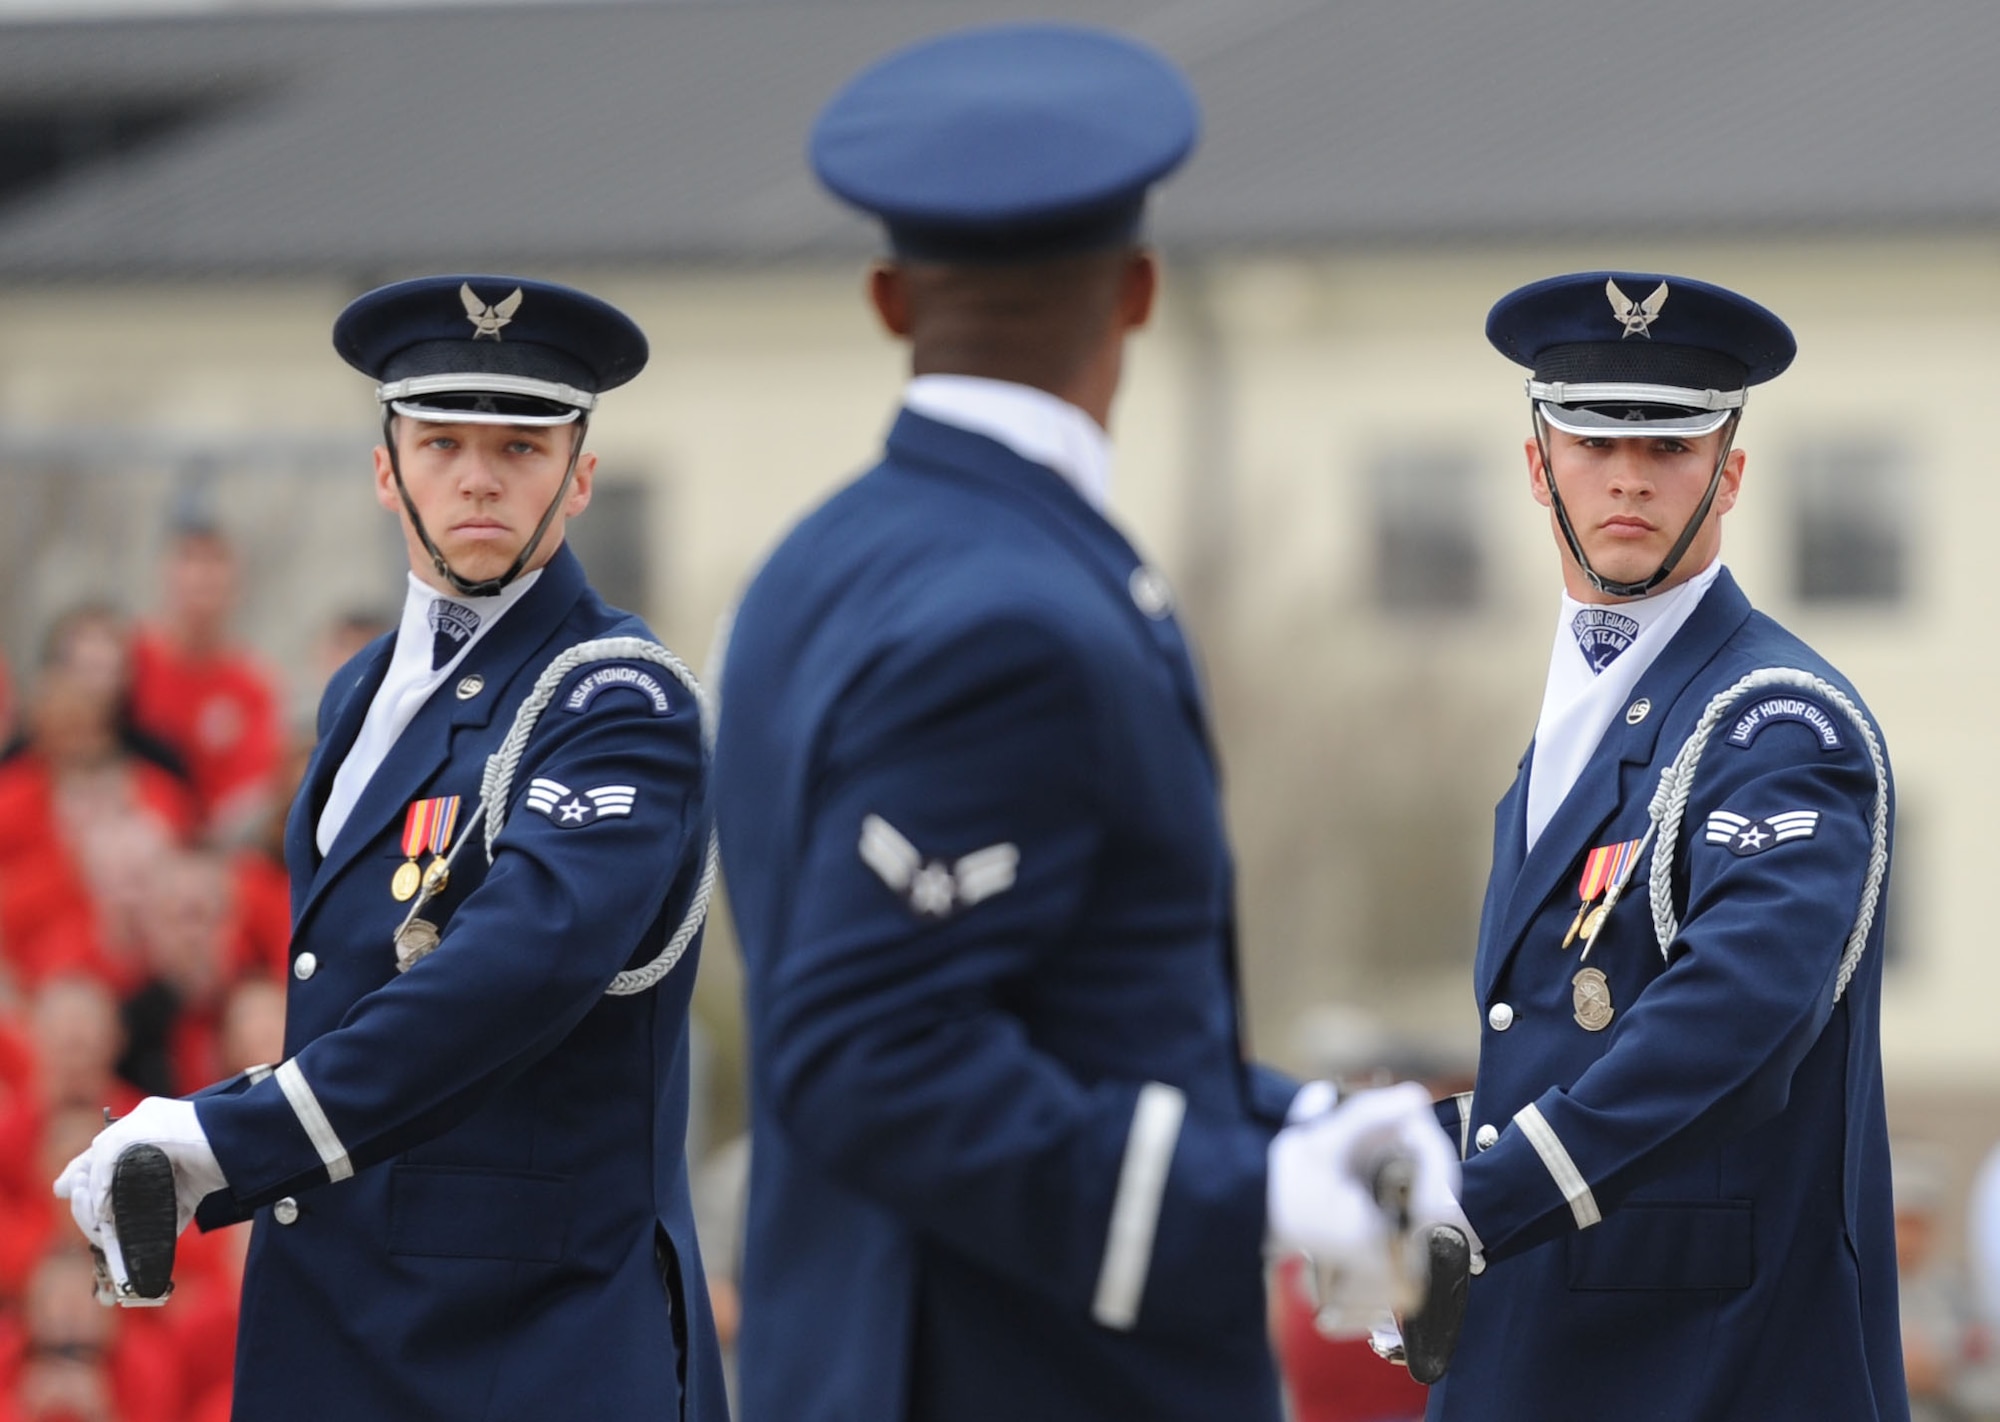 Senior Airman Scott Gricius, Airman 1st Class Nigel Jaggard and Senior Airman Tyler Reynolds, U.S. Air Force Honor Guard Drill Team members, debut the team’s 2017 routine during the 81st Training Group drill down at the Levitow Training Support Facility drill pad March 10, 2017, on Keesler Air Force Base, Miss. The team comes to Keesler every year for five weeks to develop a new routine that they will use throughout the year. (U.S. Air Force photo by Kemberly Groue)